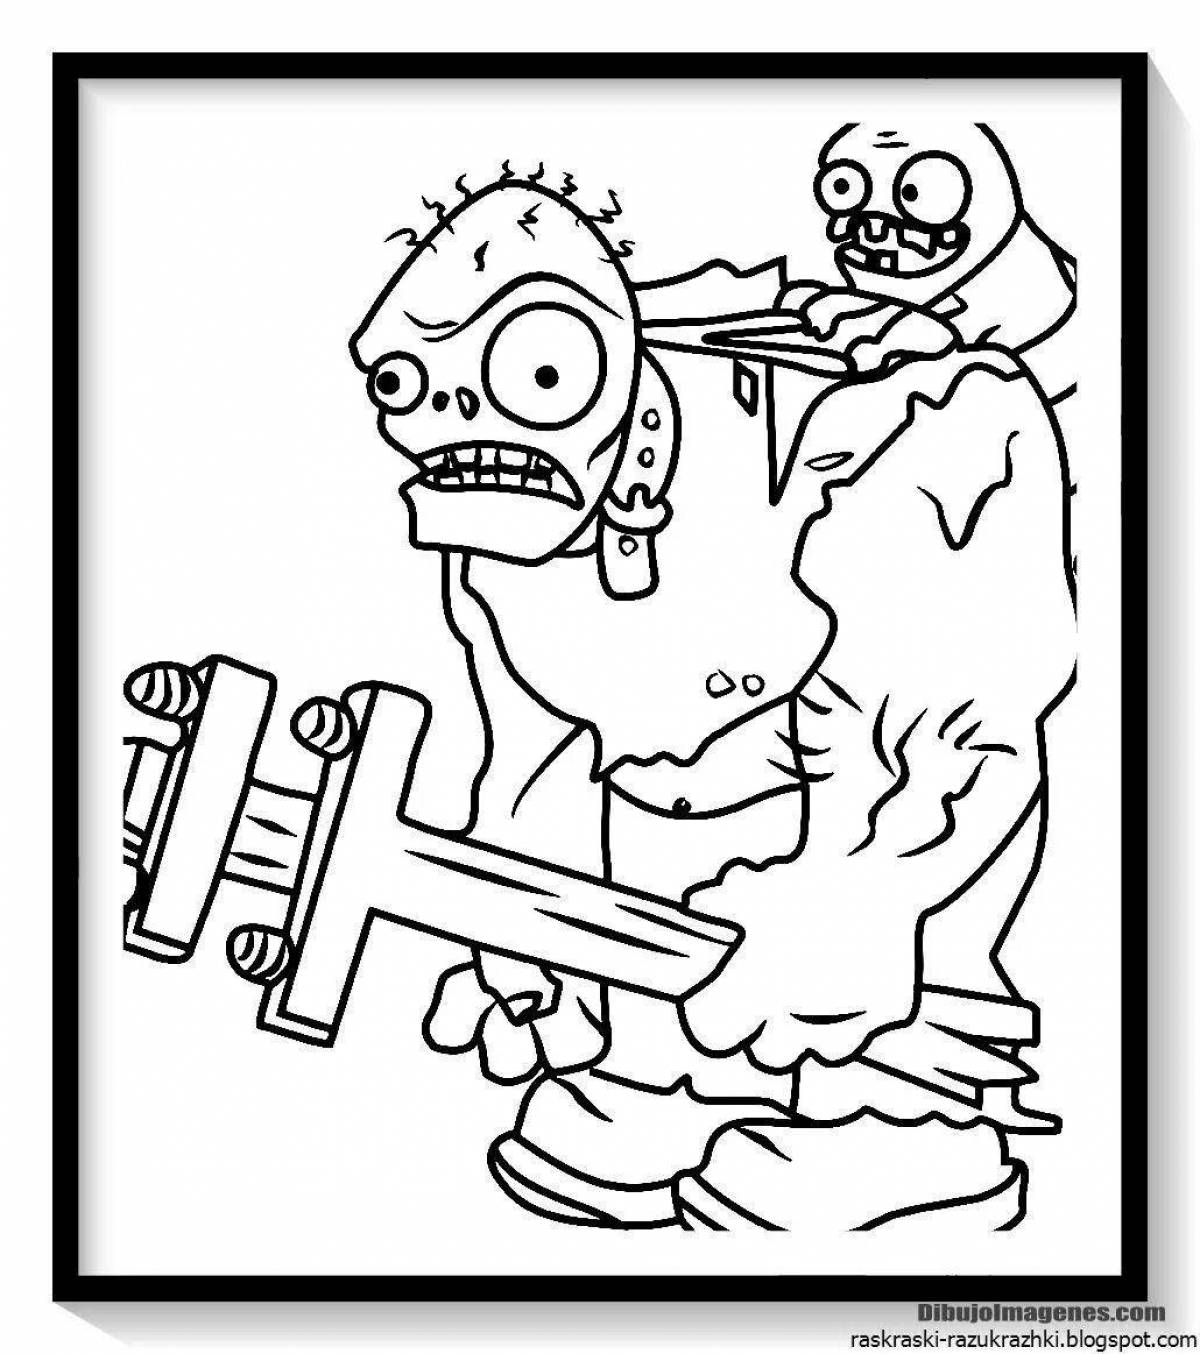 Spooky zombie coloring book for kids